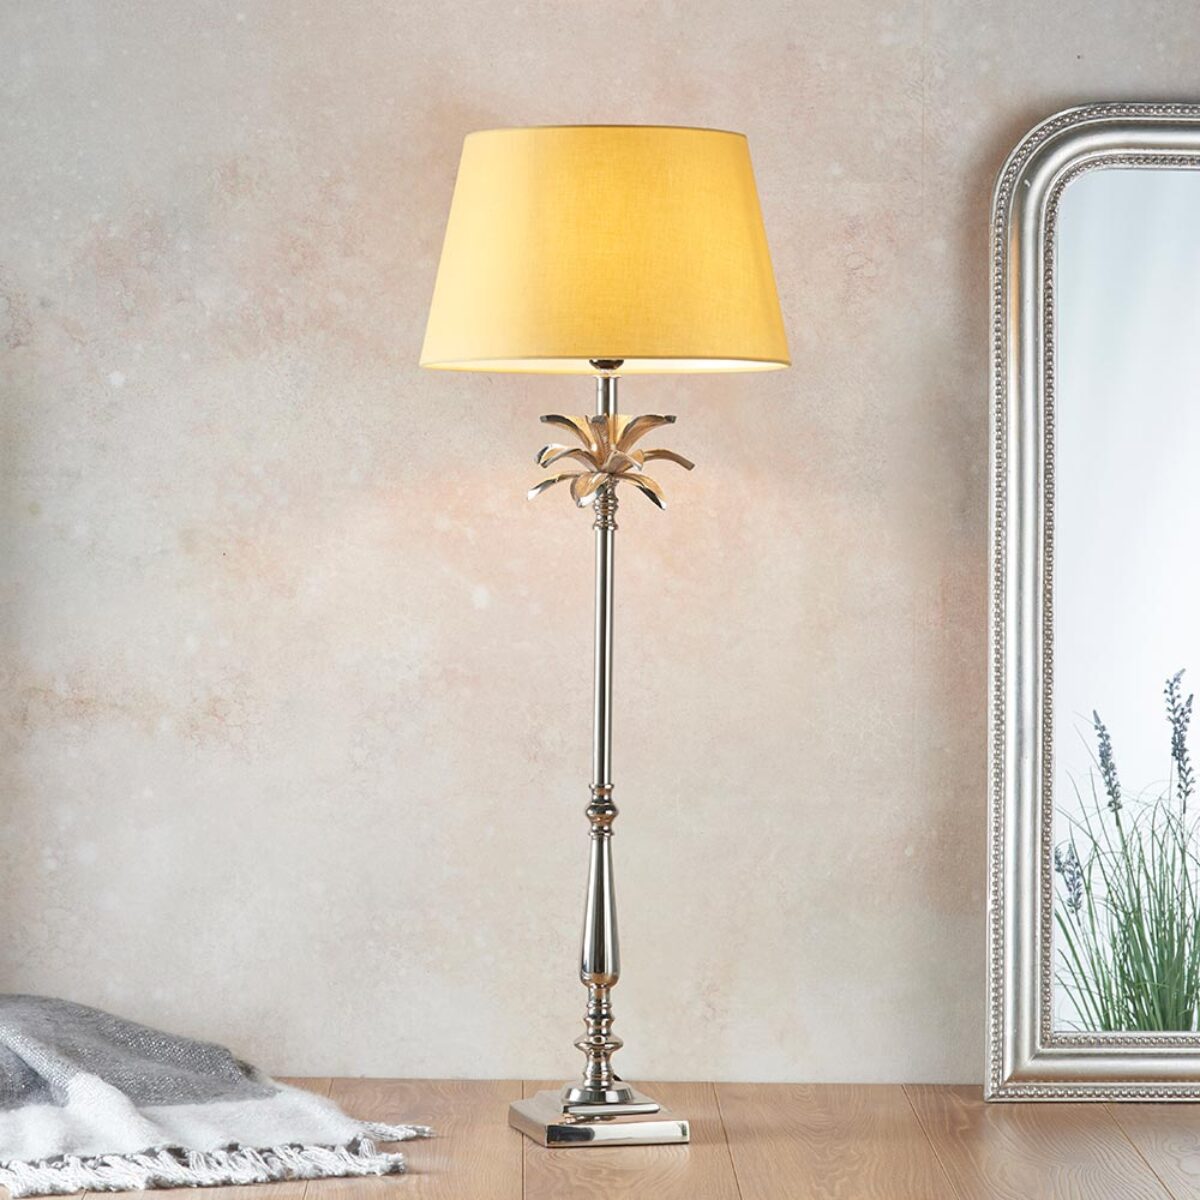 Leaf Large Candlestick Table Lamp, Large Yellow Table Lamp Shade